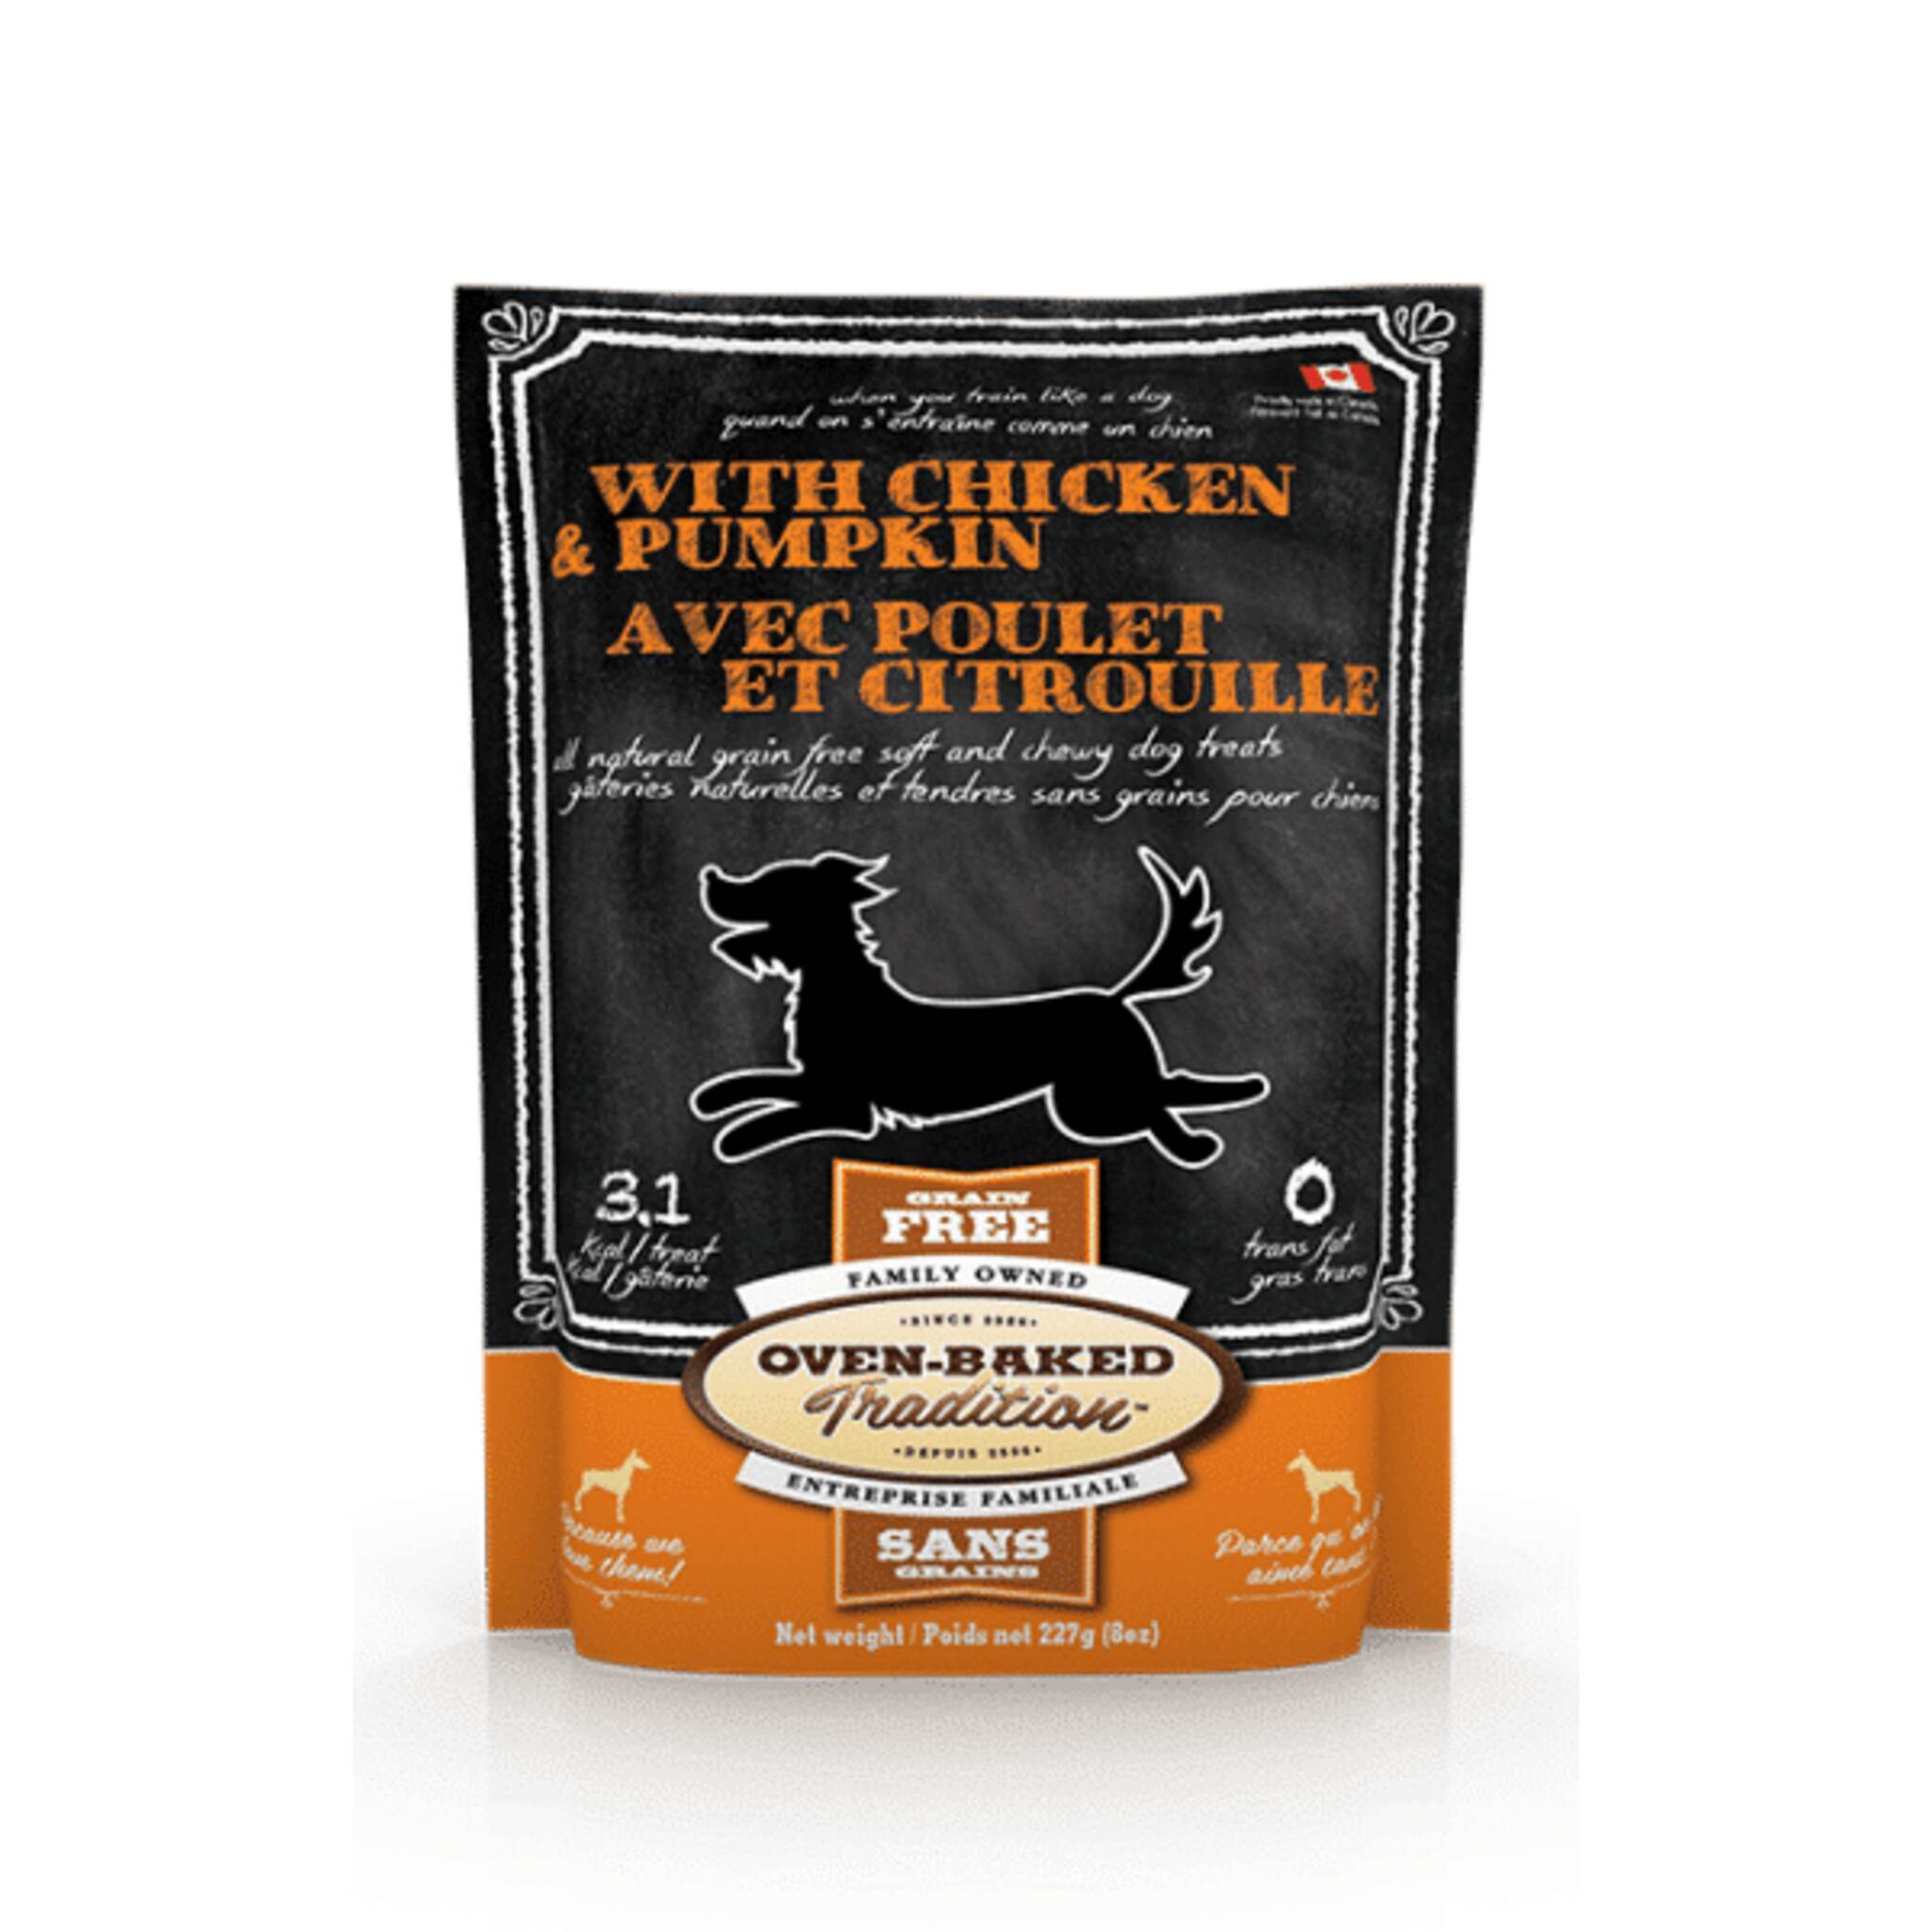 A bag of Oven-Baked Tradition soft and chewy dog treats, chicken and pumpkin recipe, 8 oz.